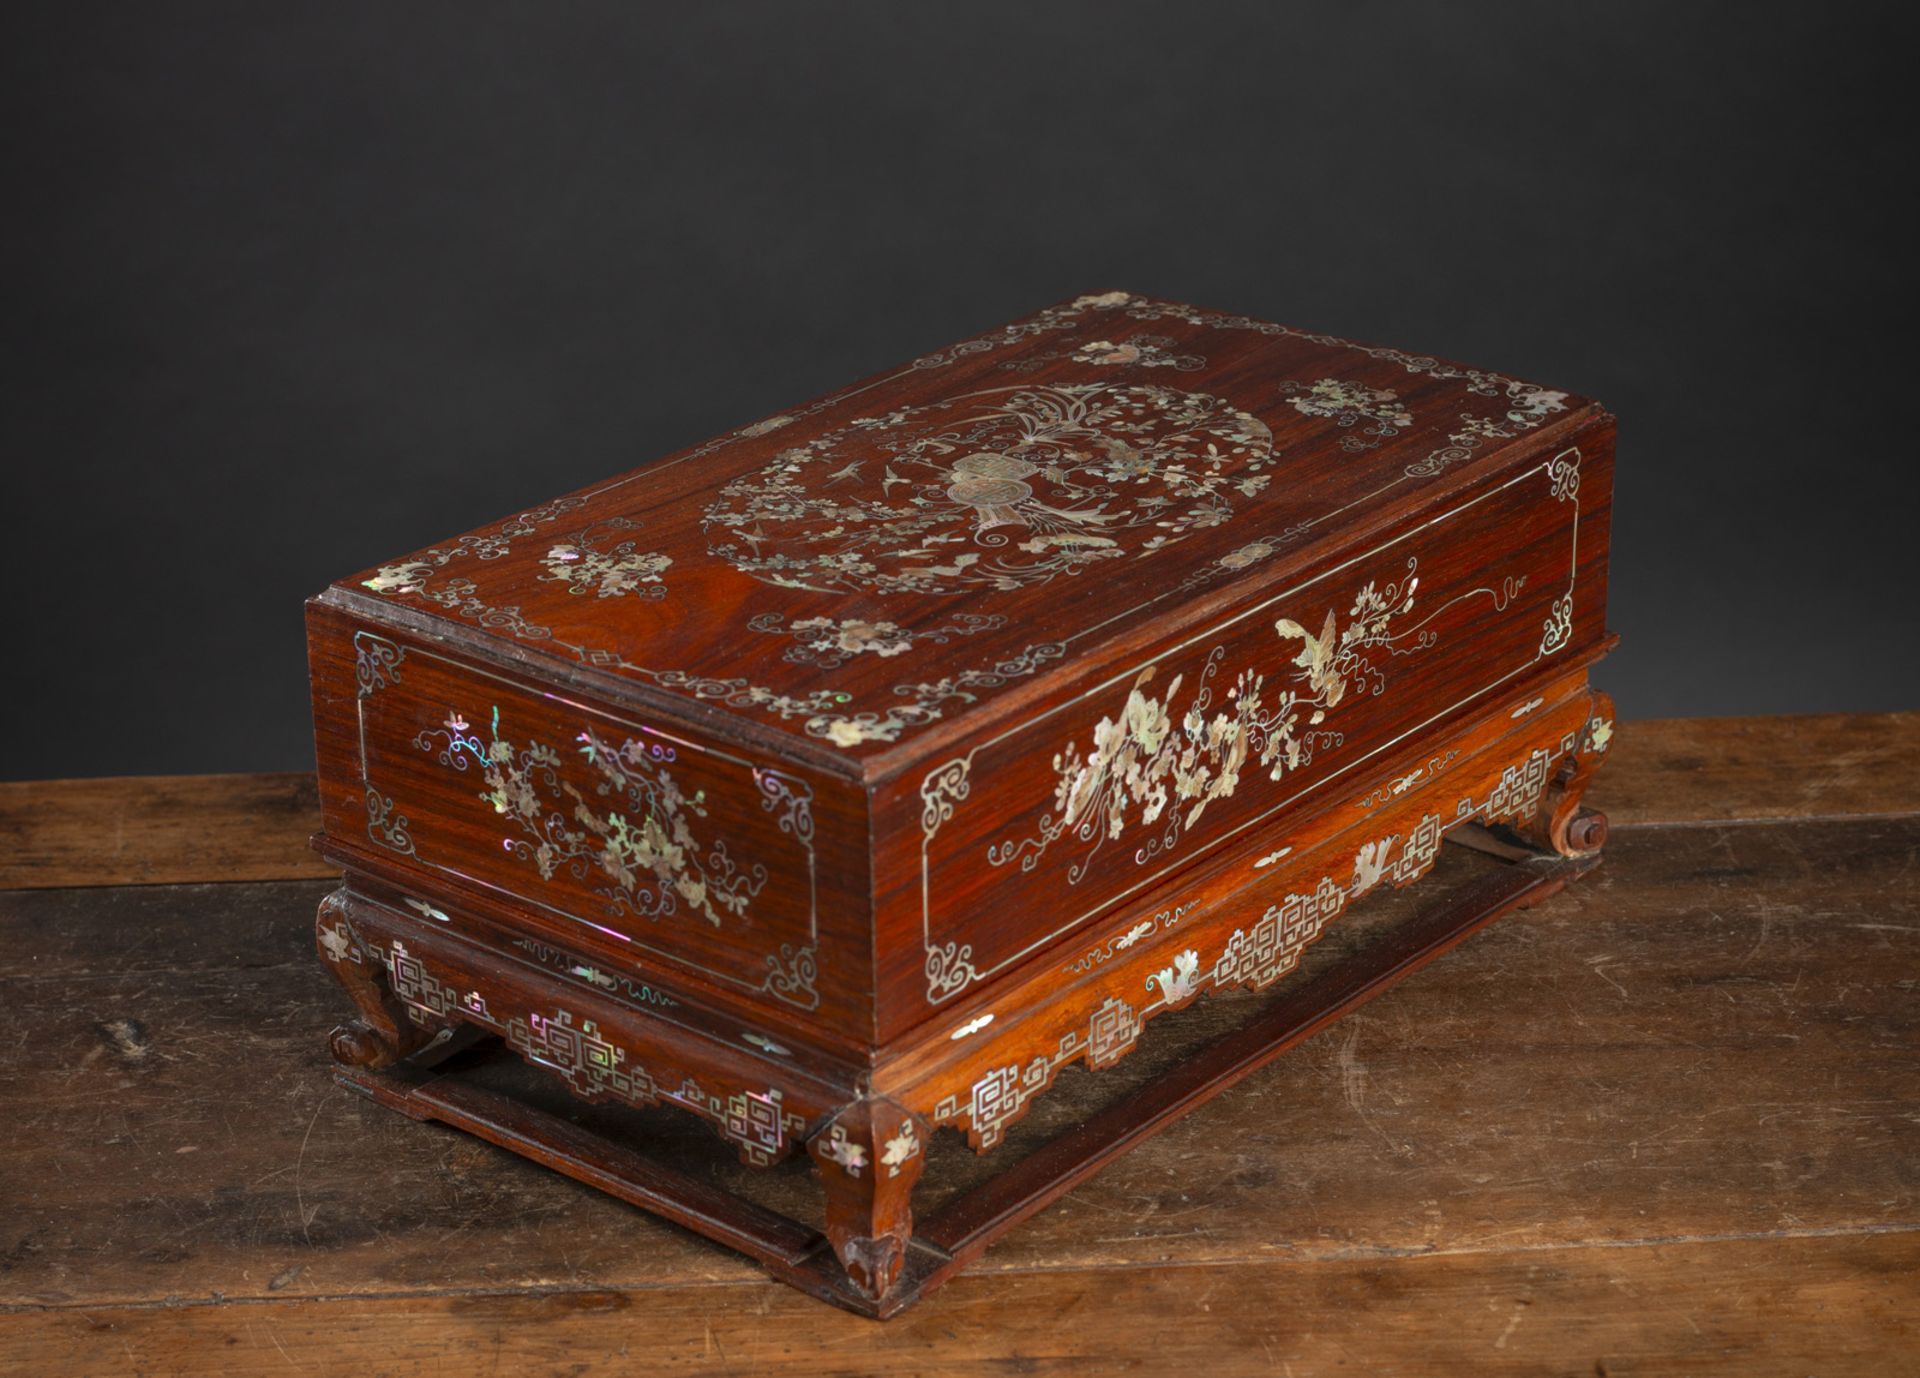 A MOTHER-OF-PEARL-INLAID FLORAL WOOD BOX AND COVER - Image 2 of 4